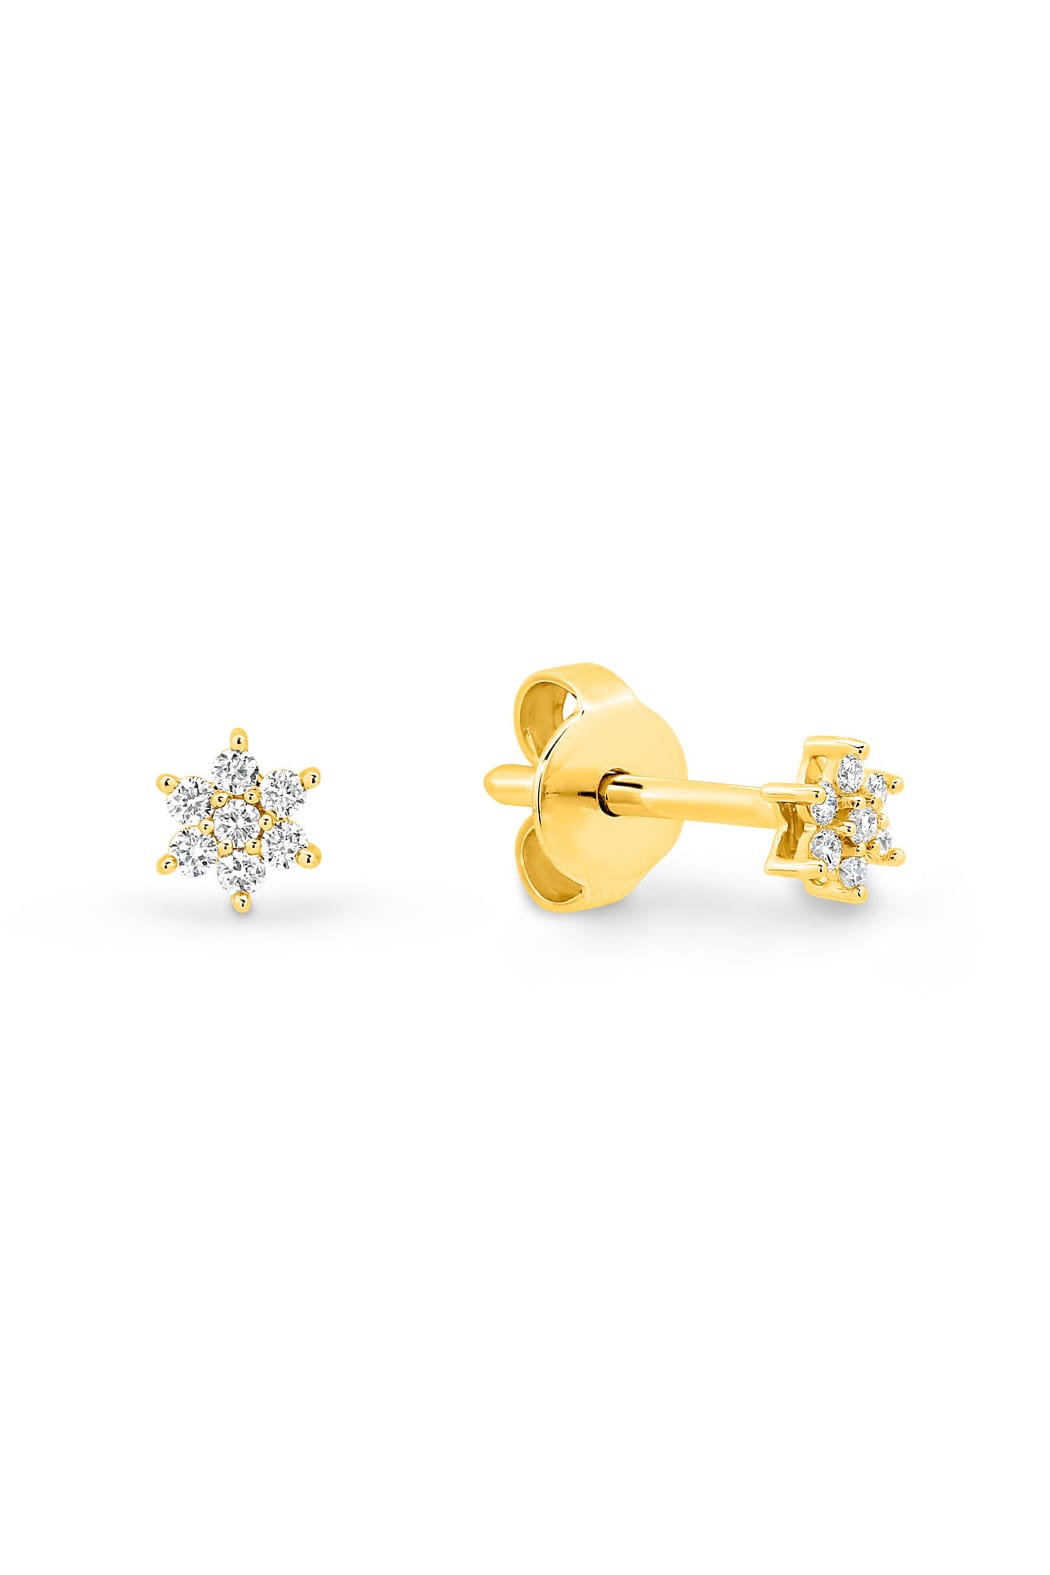 0.11ct Diamond Cluster Stud Earrings set in 9ct Yellow Gold from LeGassick